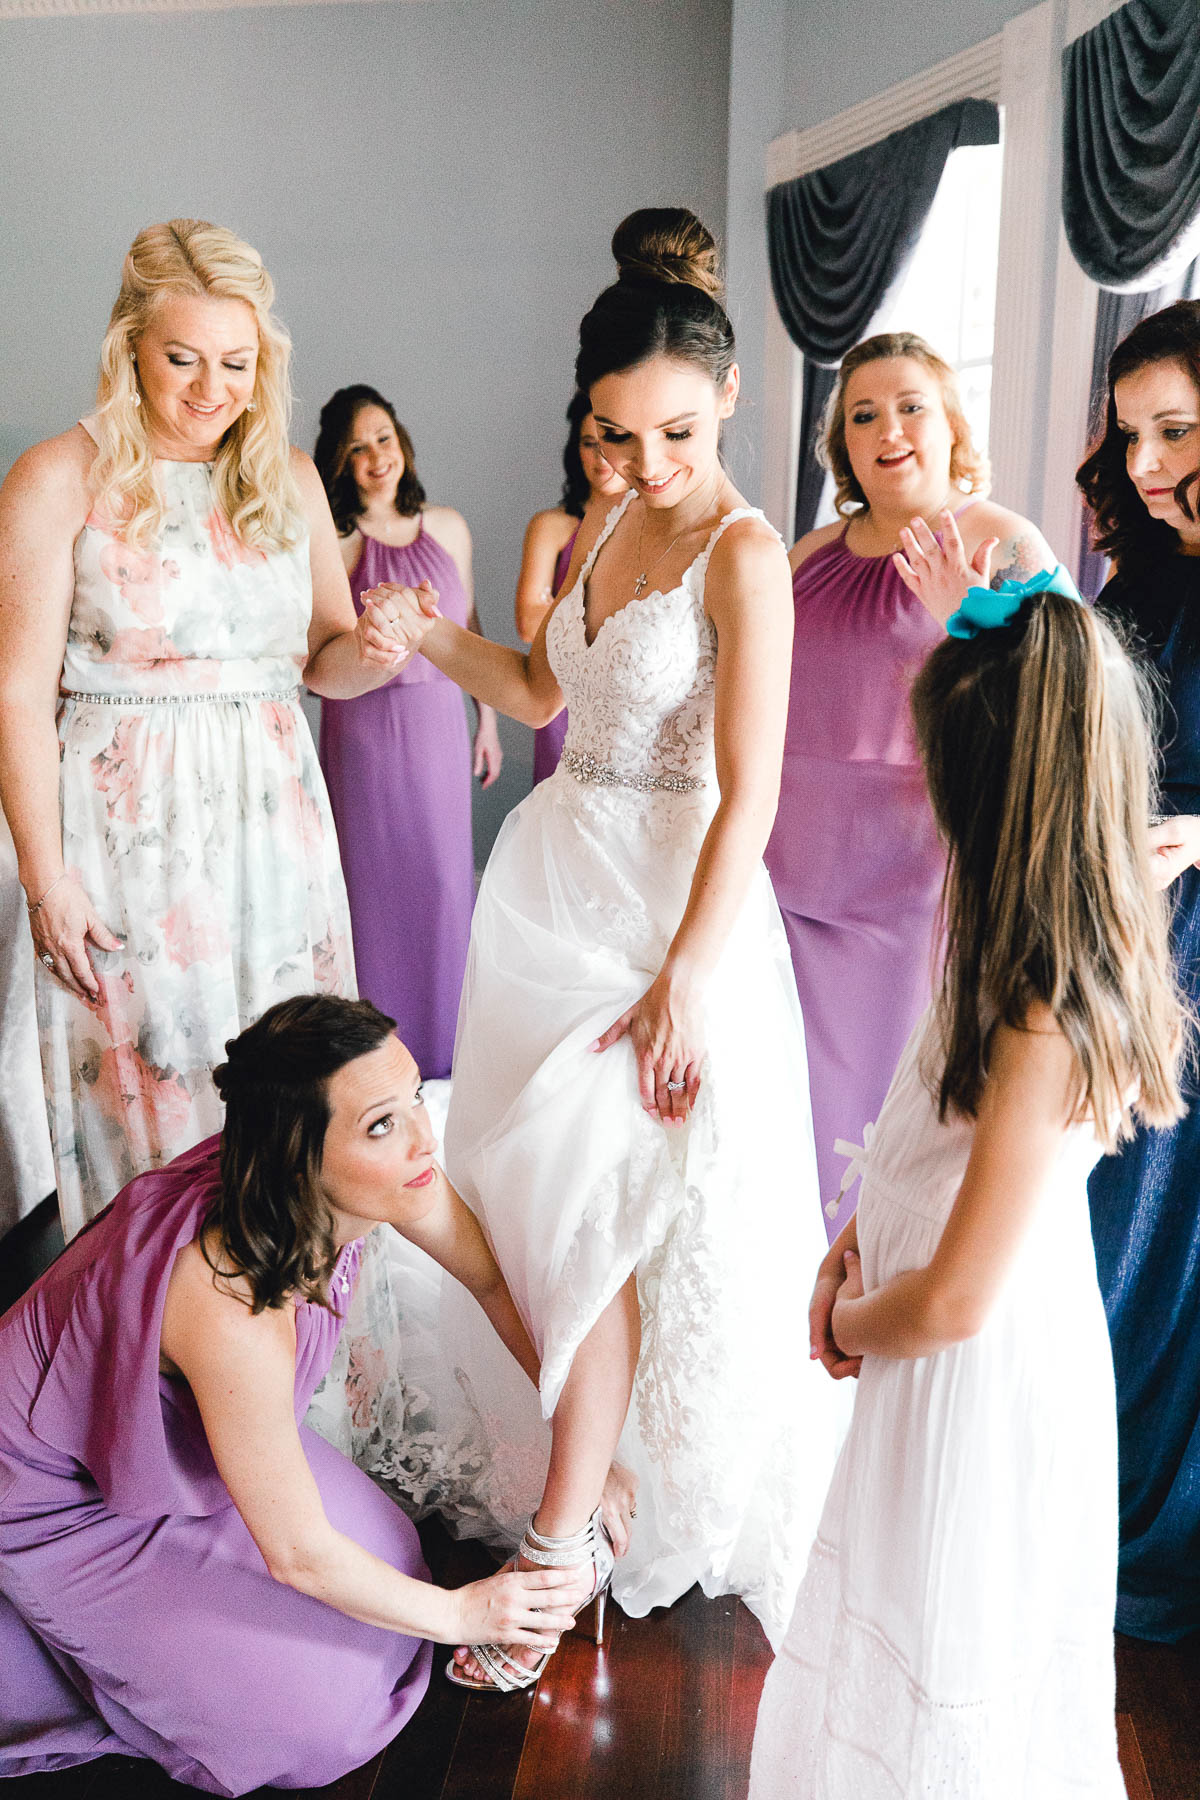 Bridesmaids helping bride put on her wedding shoes